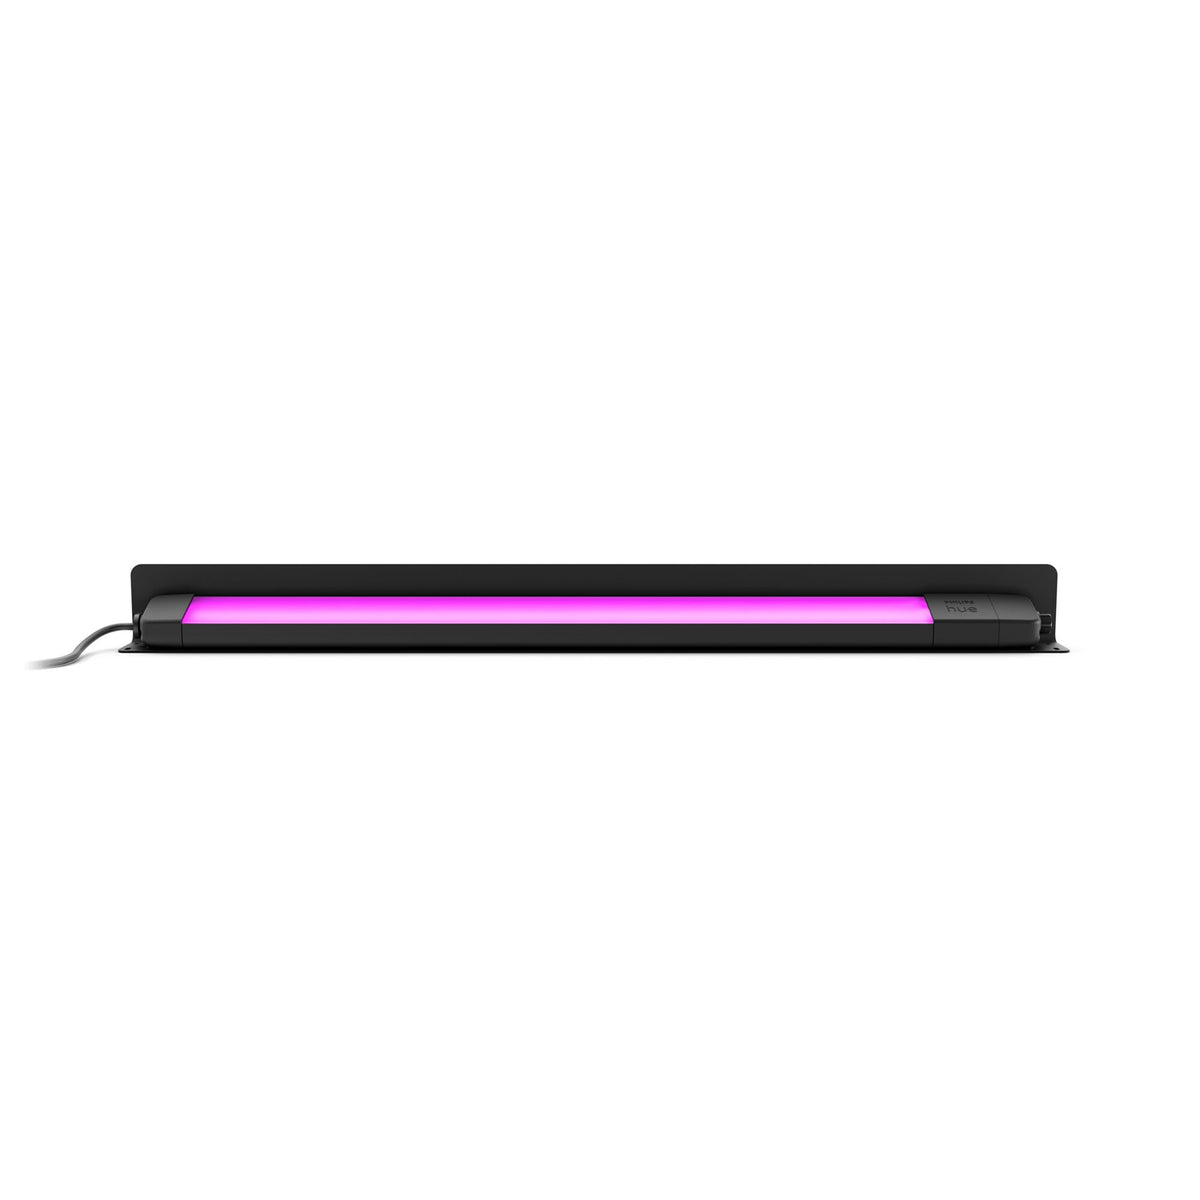 Philips Hue Amarant linear outdoor light in Black - White and colour ambience